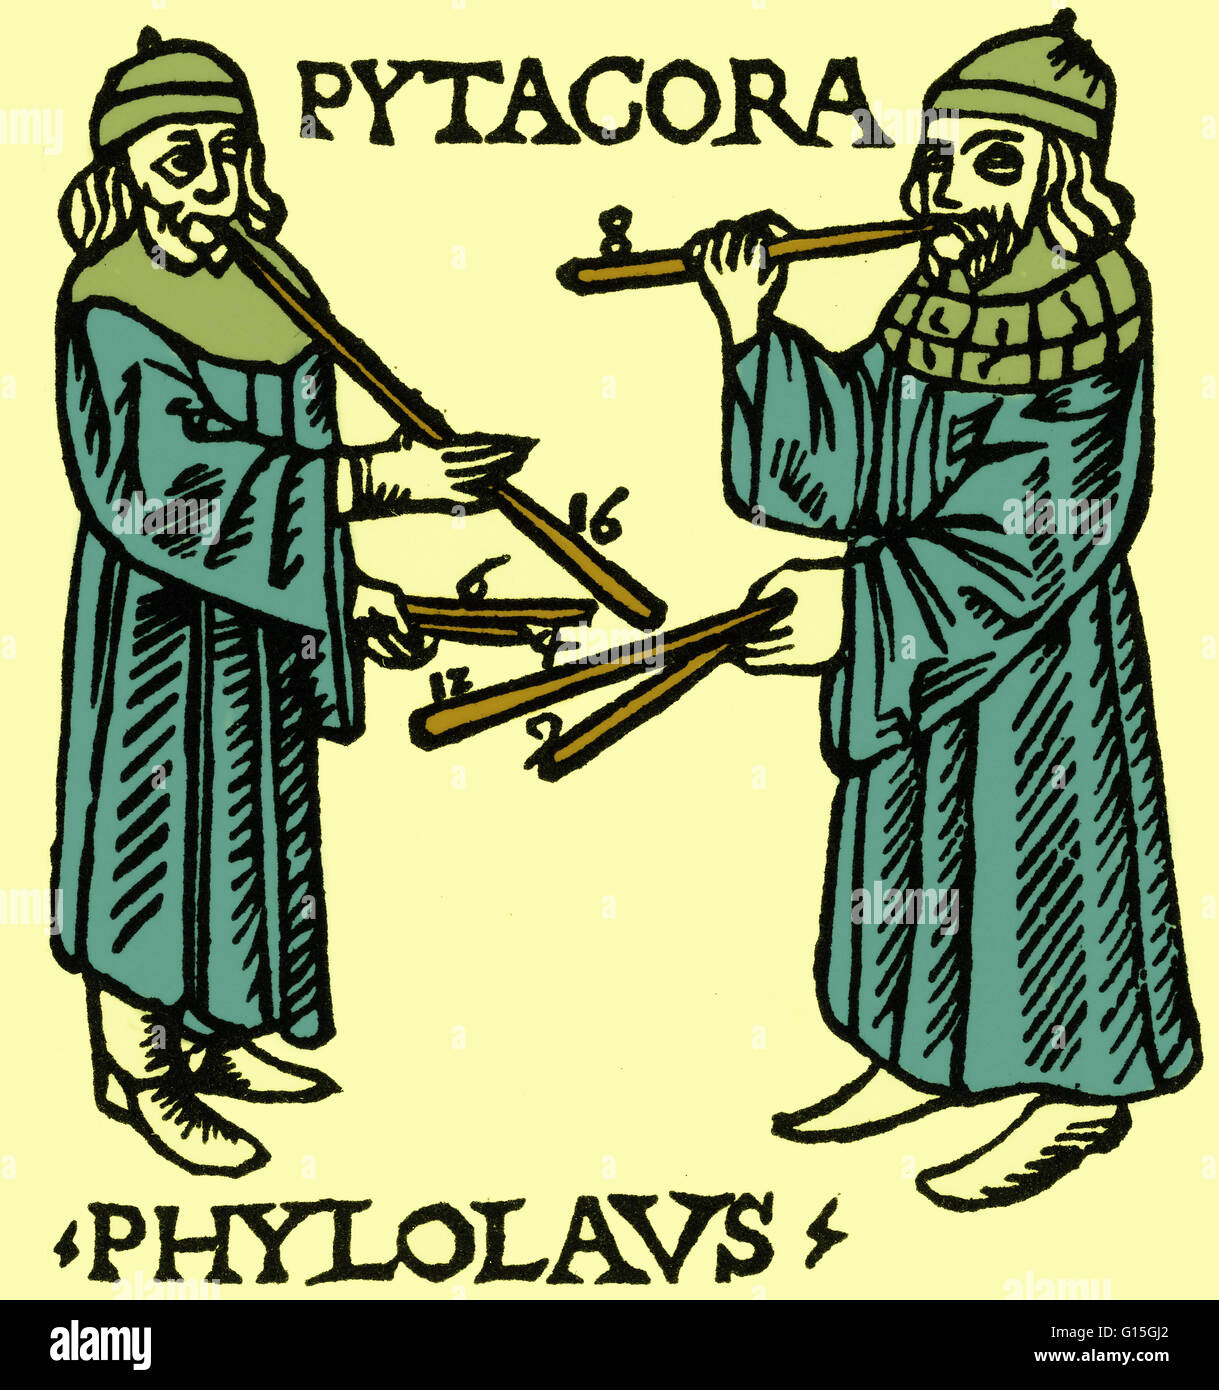 Fifteenth century woodcut of the Greek philosopher Pythagoras discovering acoustics and musical theory around 550 BC. Here, Pythagoras is shown discovering the mathematical rationale of musical pitch and harmony with pipes. Woodcut form Gaffurio's Theoric Stock Photo